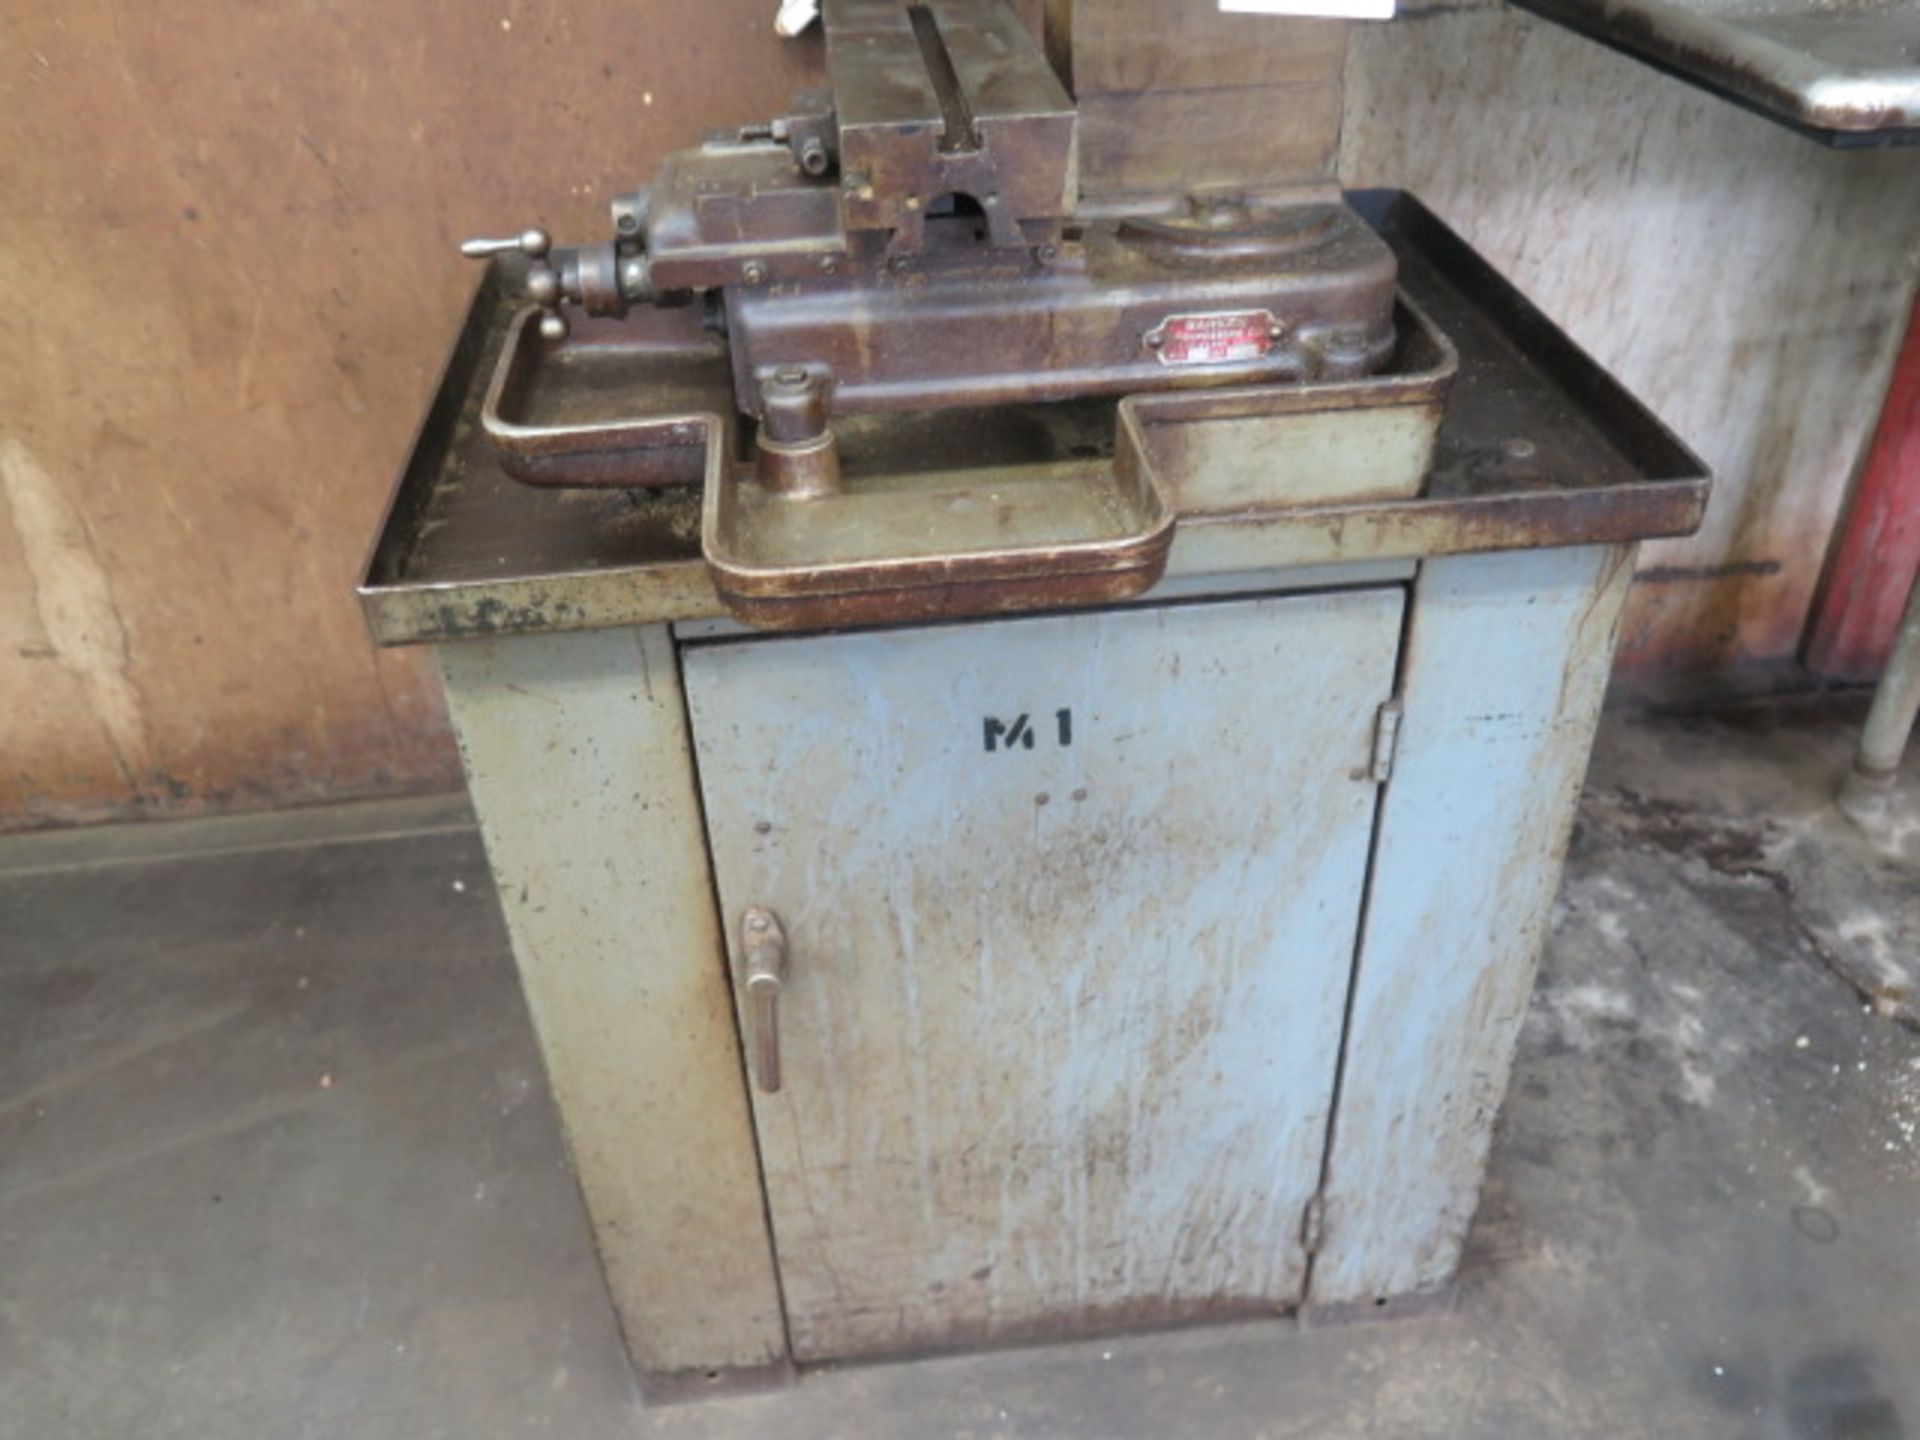 Barker mdl. PM Horizontal Mill s/n 1368 w/ 3-Speedds, 4” x 12” Table (SOLD AS-IS - NO WARRANTY) - Image 3 of 7